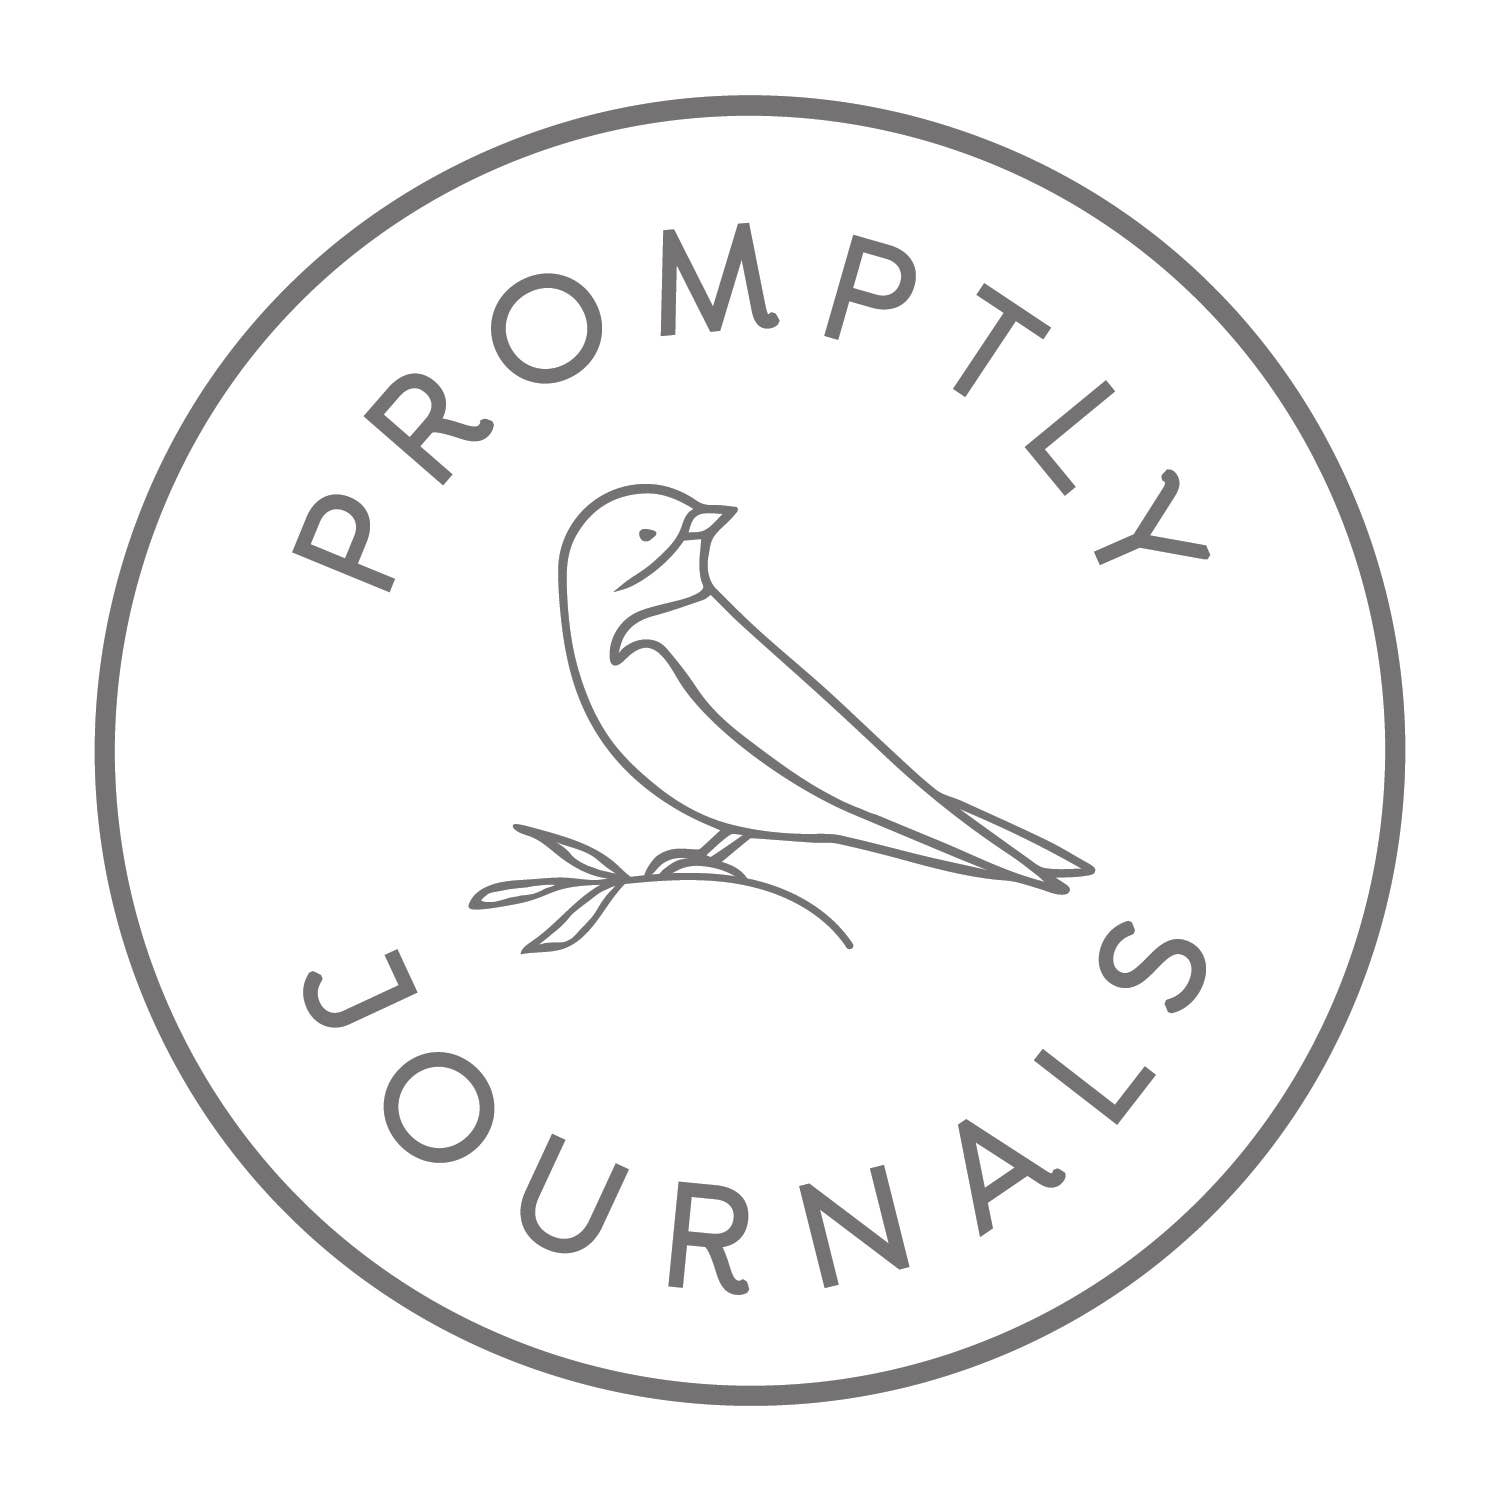 Honoring My Loved One: A Remembrance Journal (Wheat) – Promptly Journals